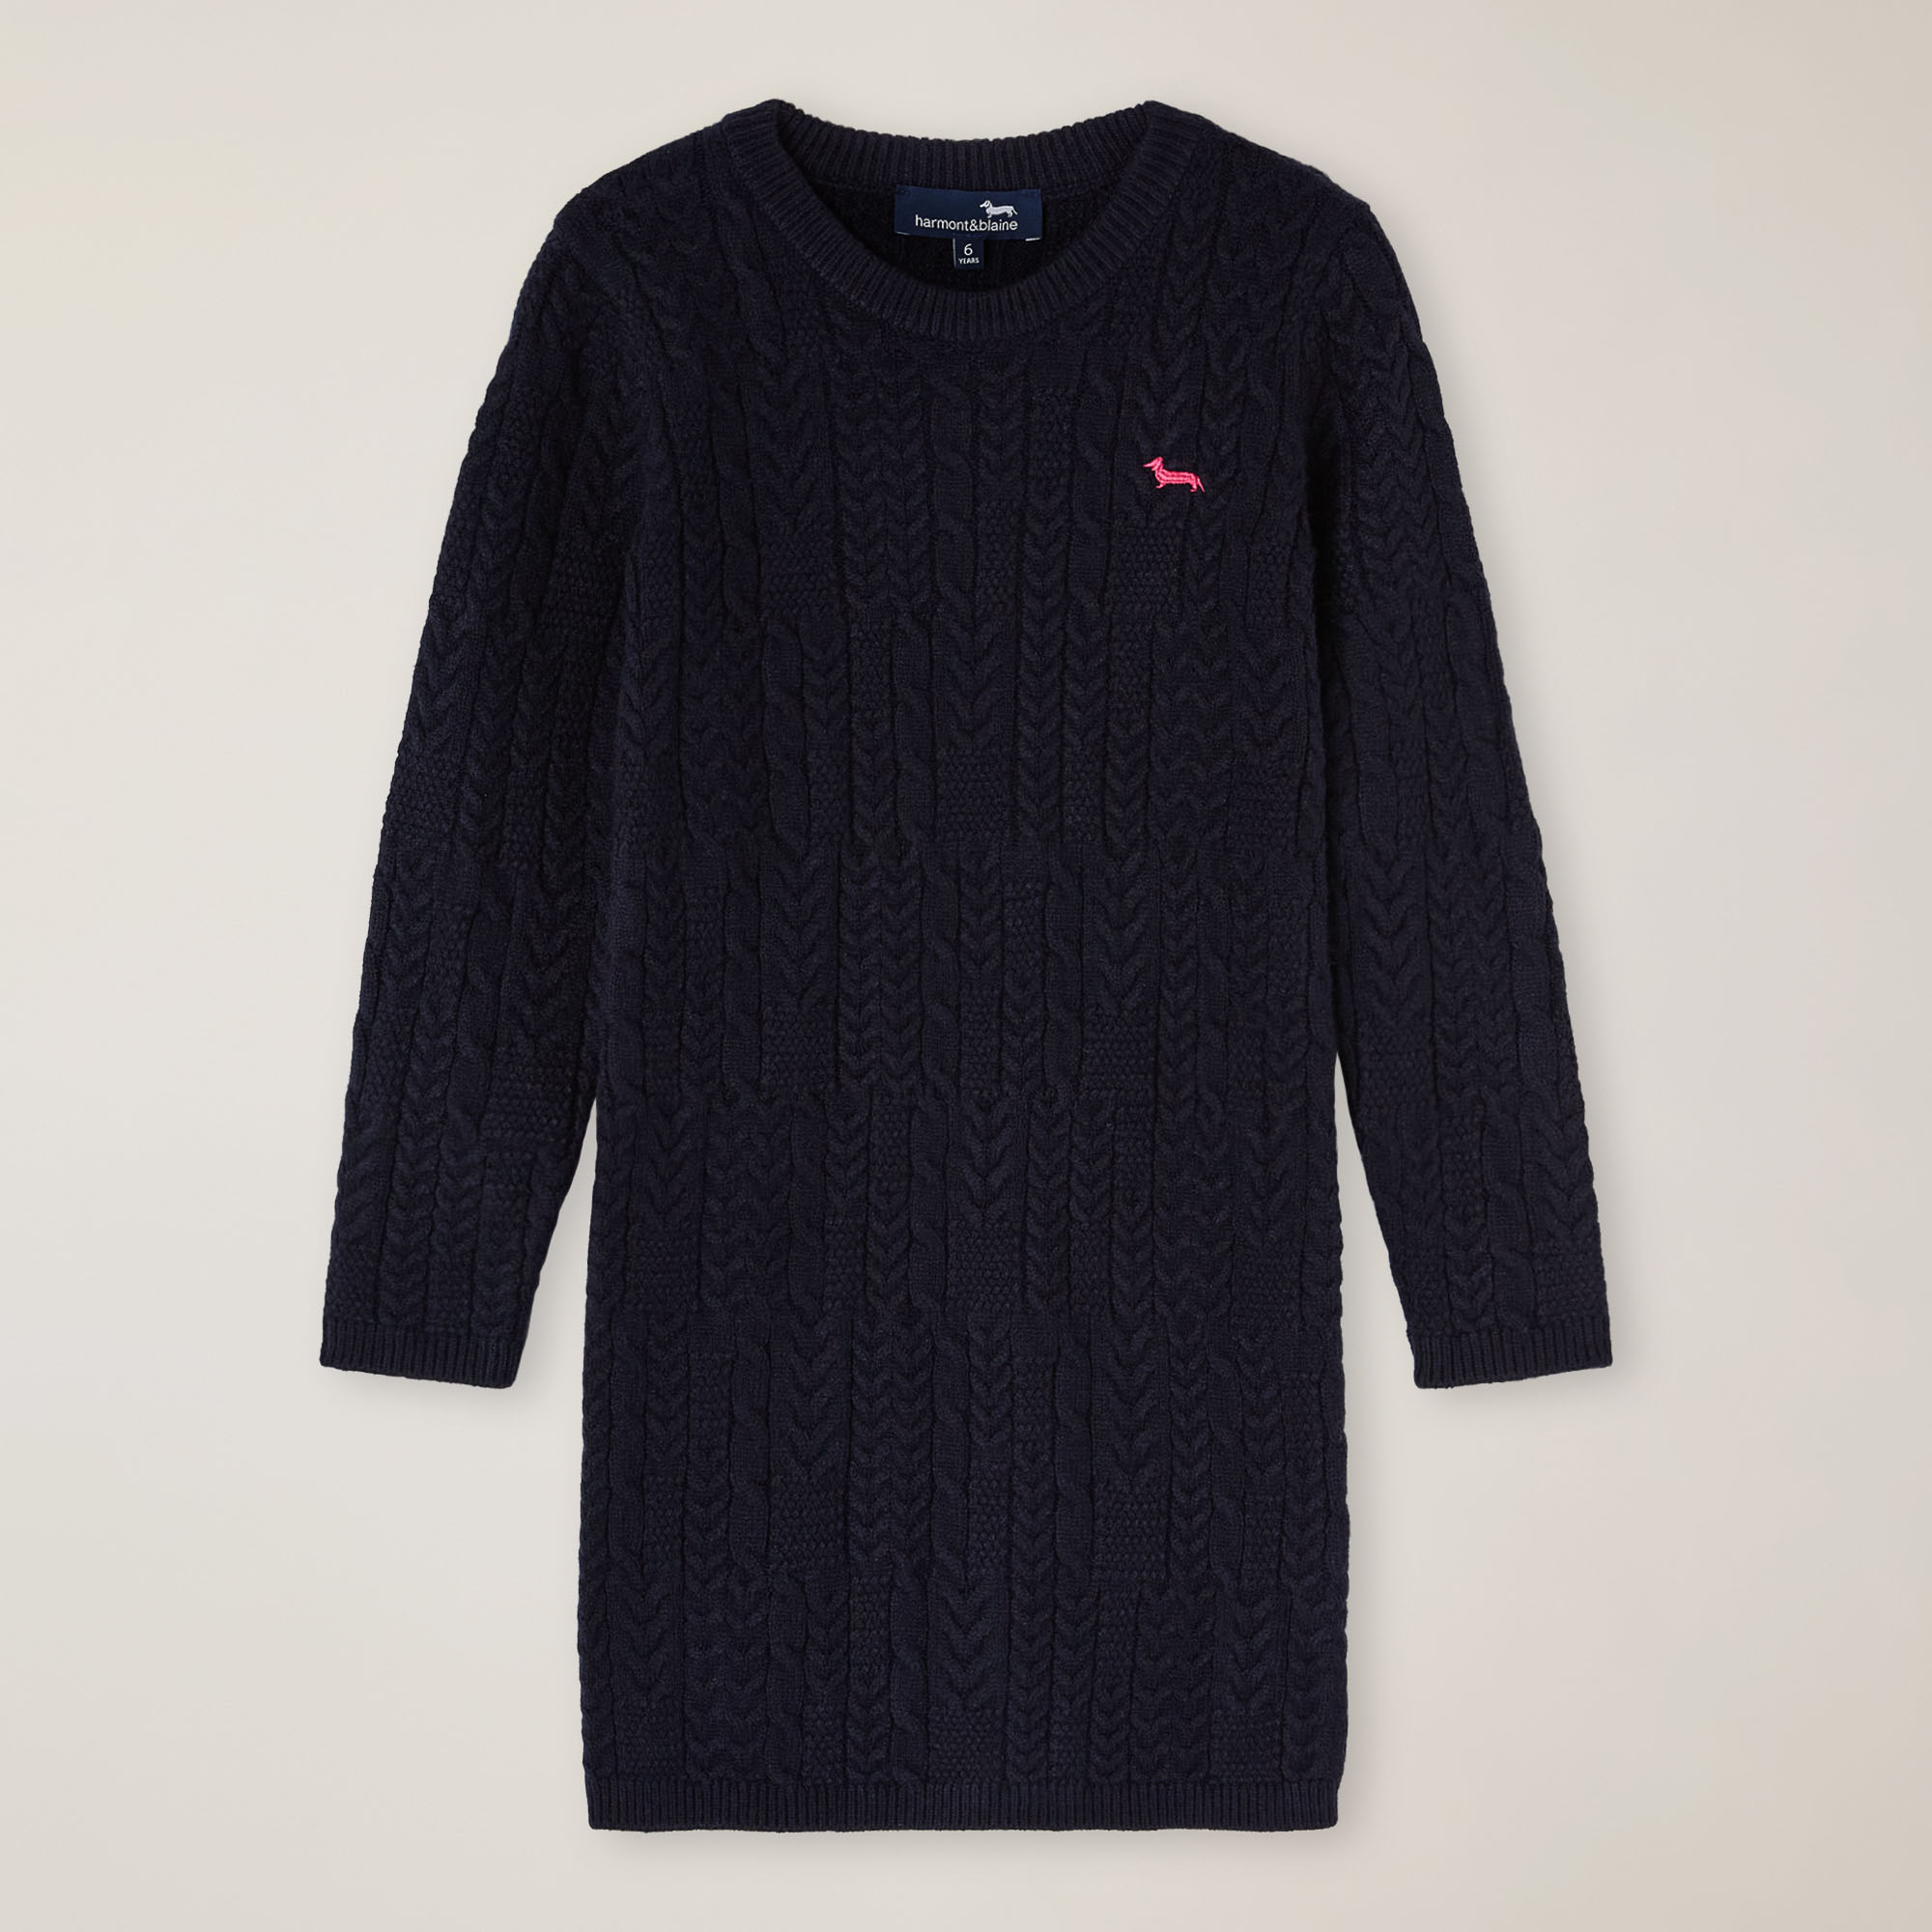 Knitted dress, Navy blue, large